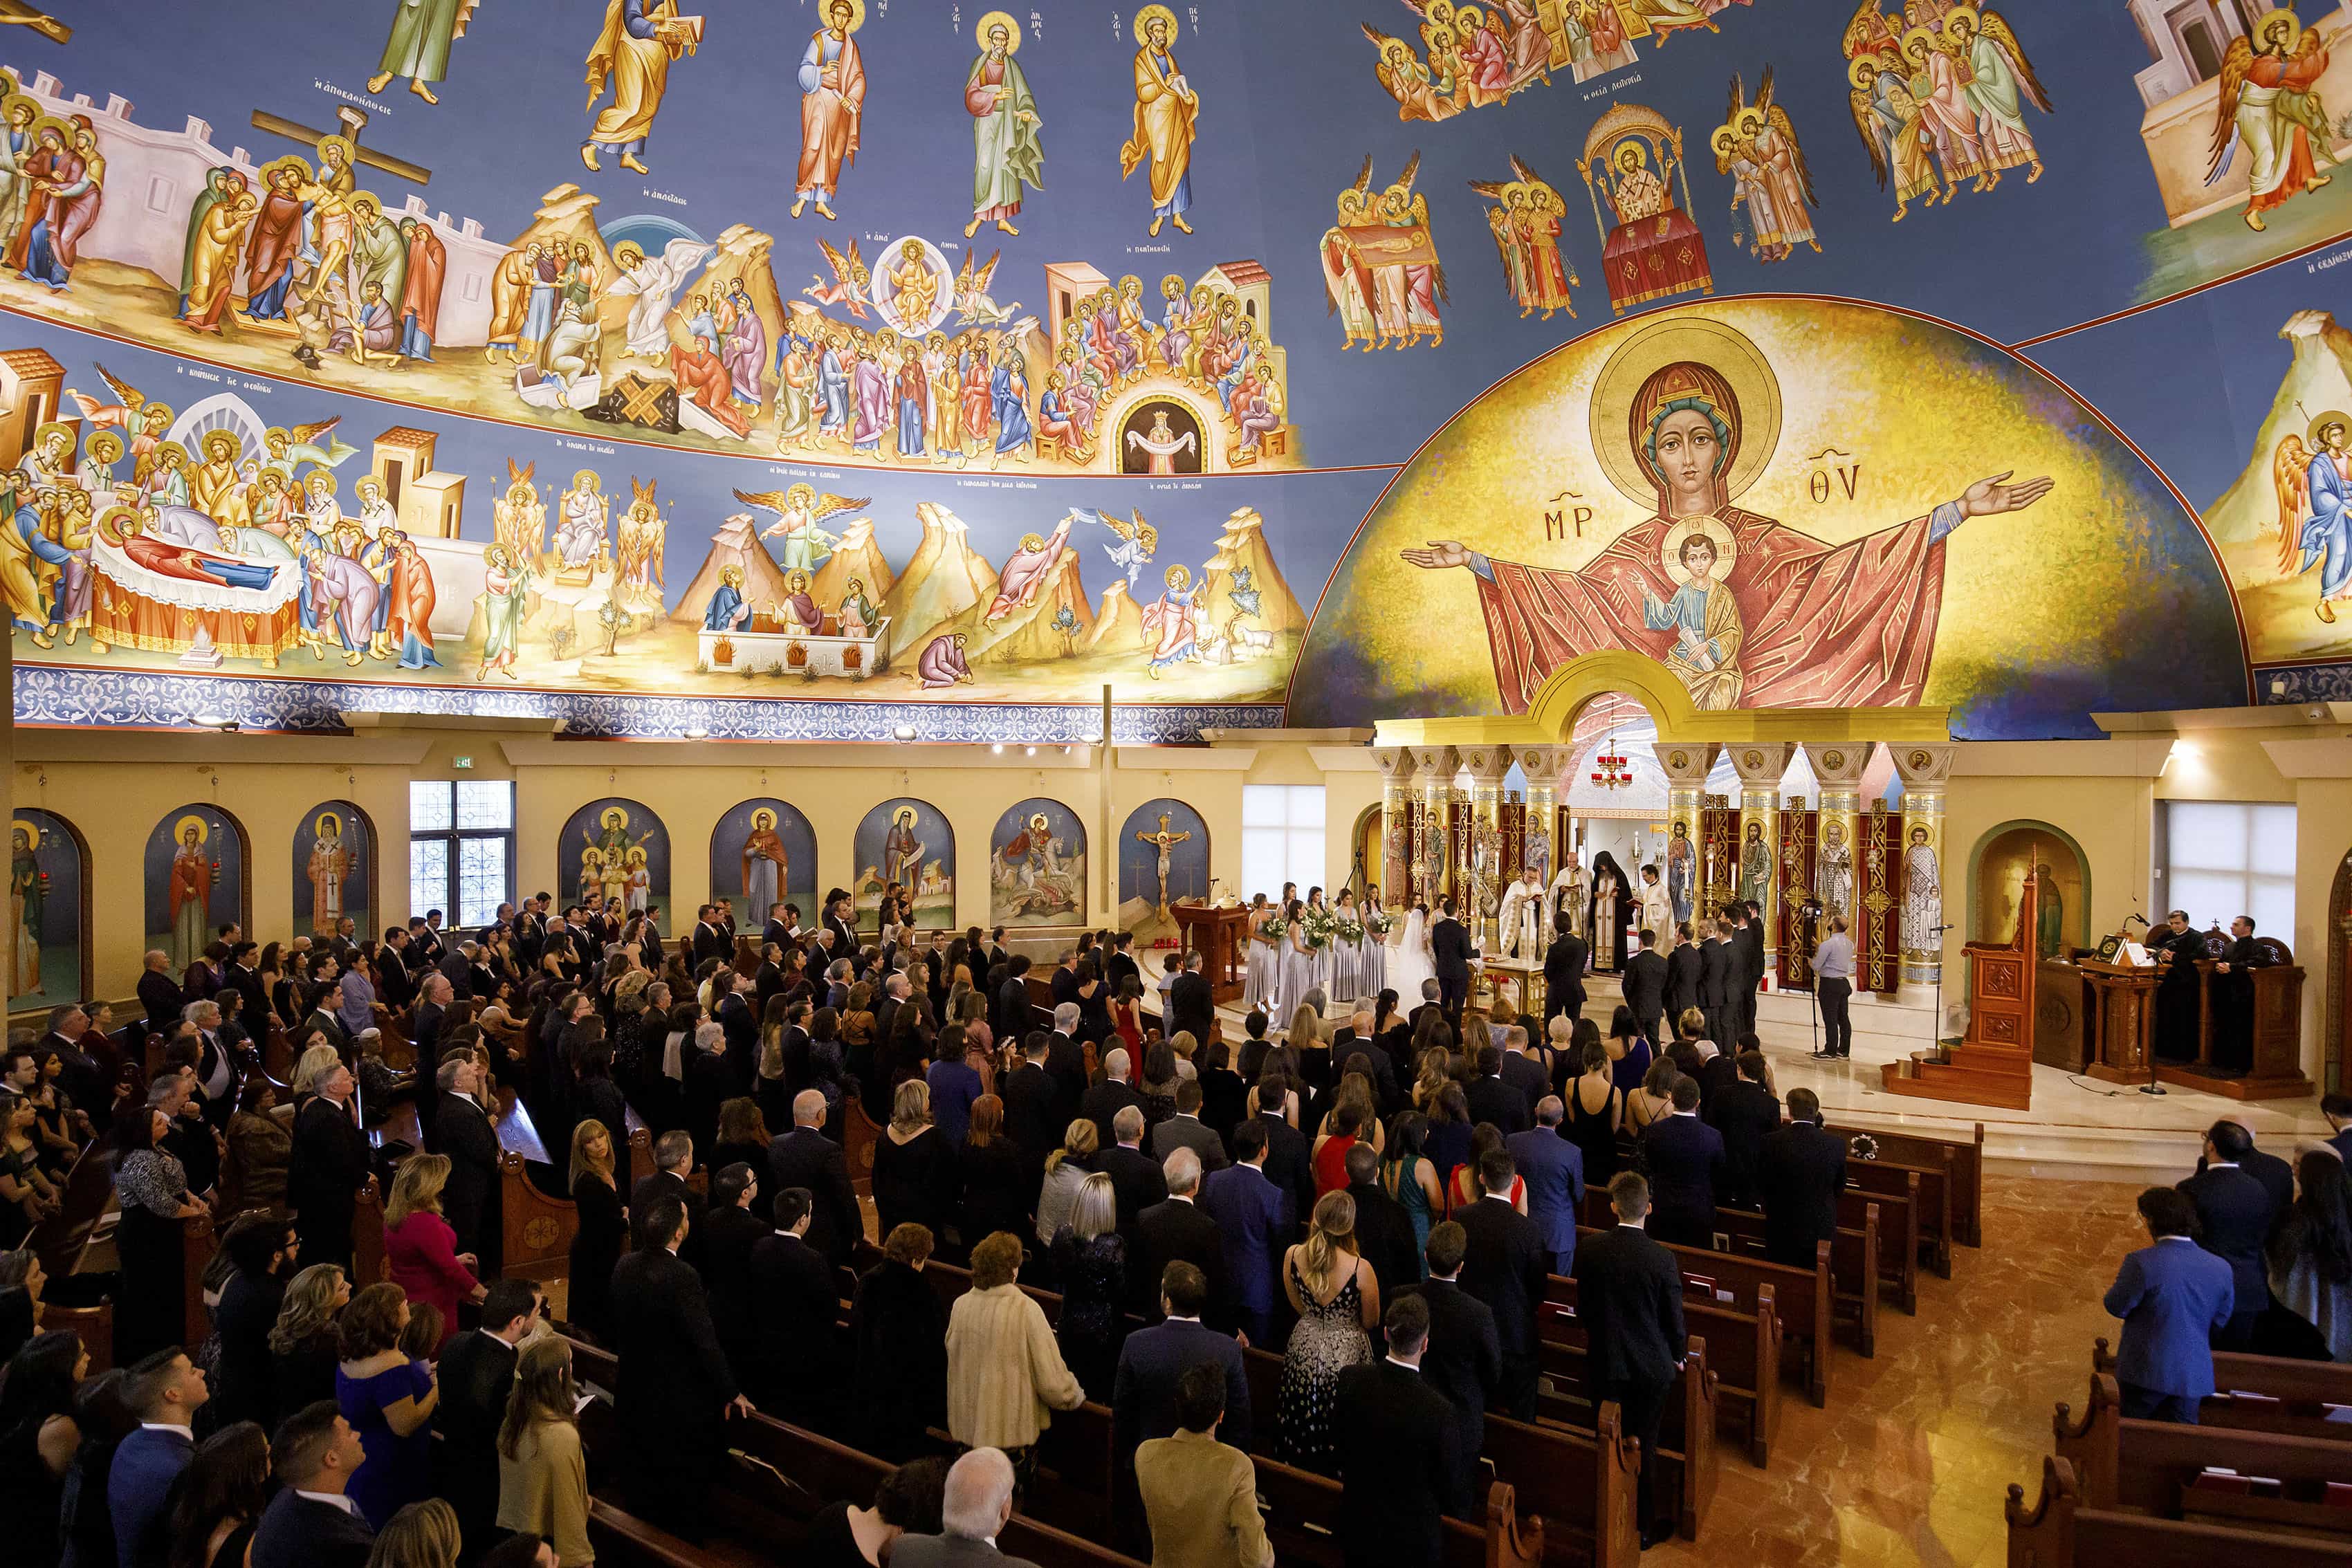 Ioanna and Alex's wedding ceremony at Assumption of the Theotokos Greek Orthodox Cathedral